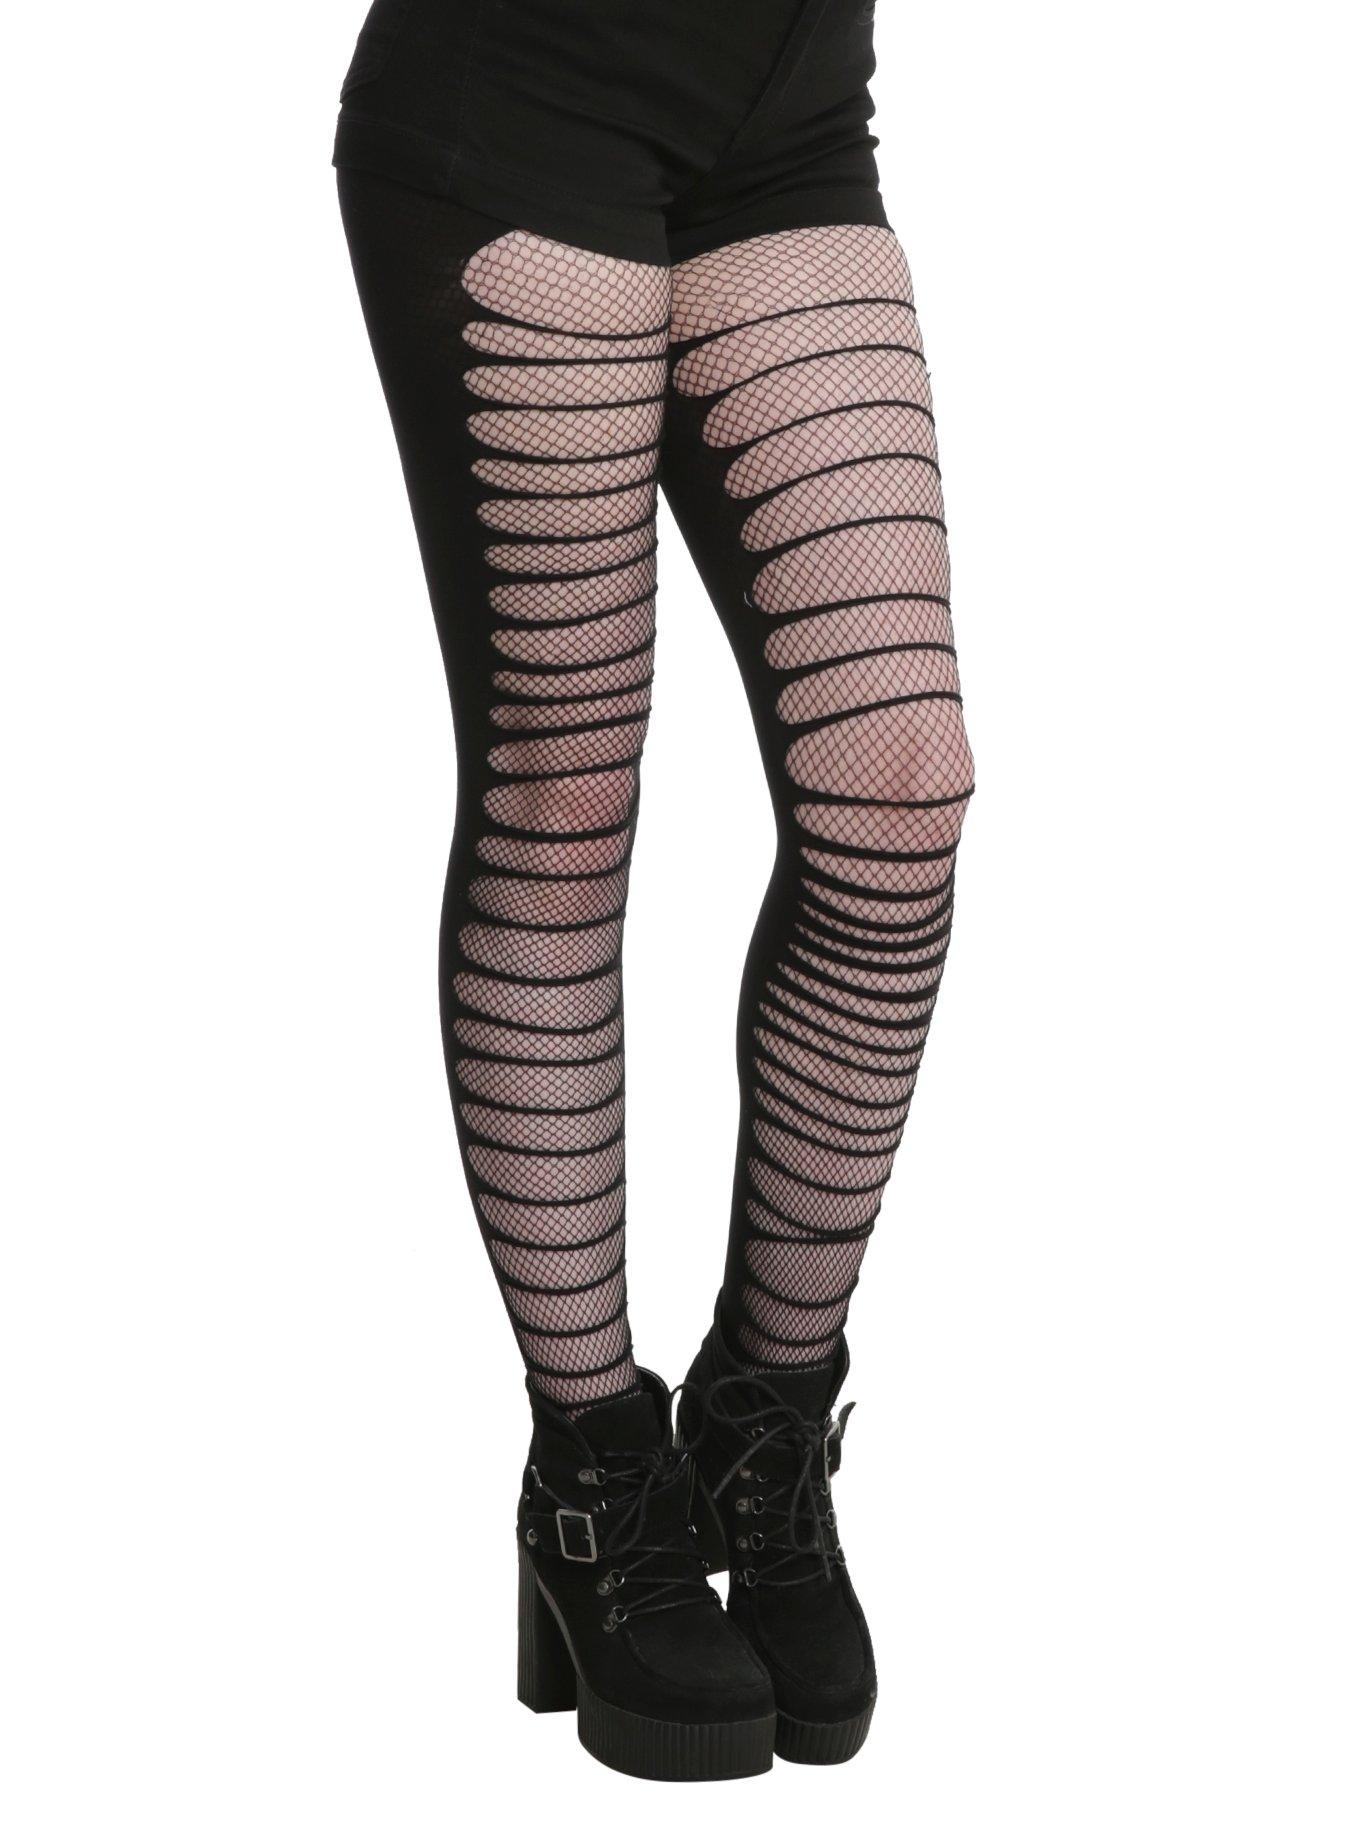 Double fishnet tights, black, Women's Tights